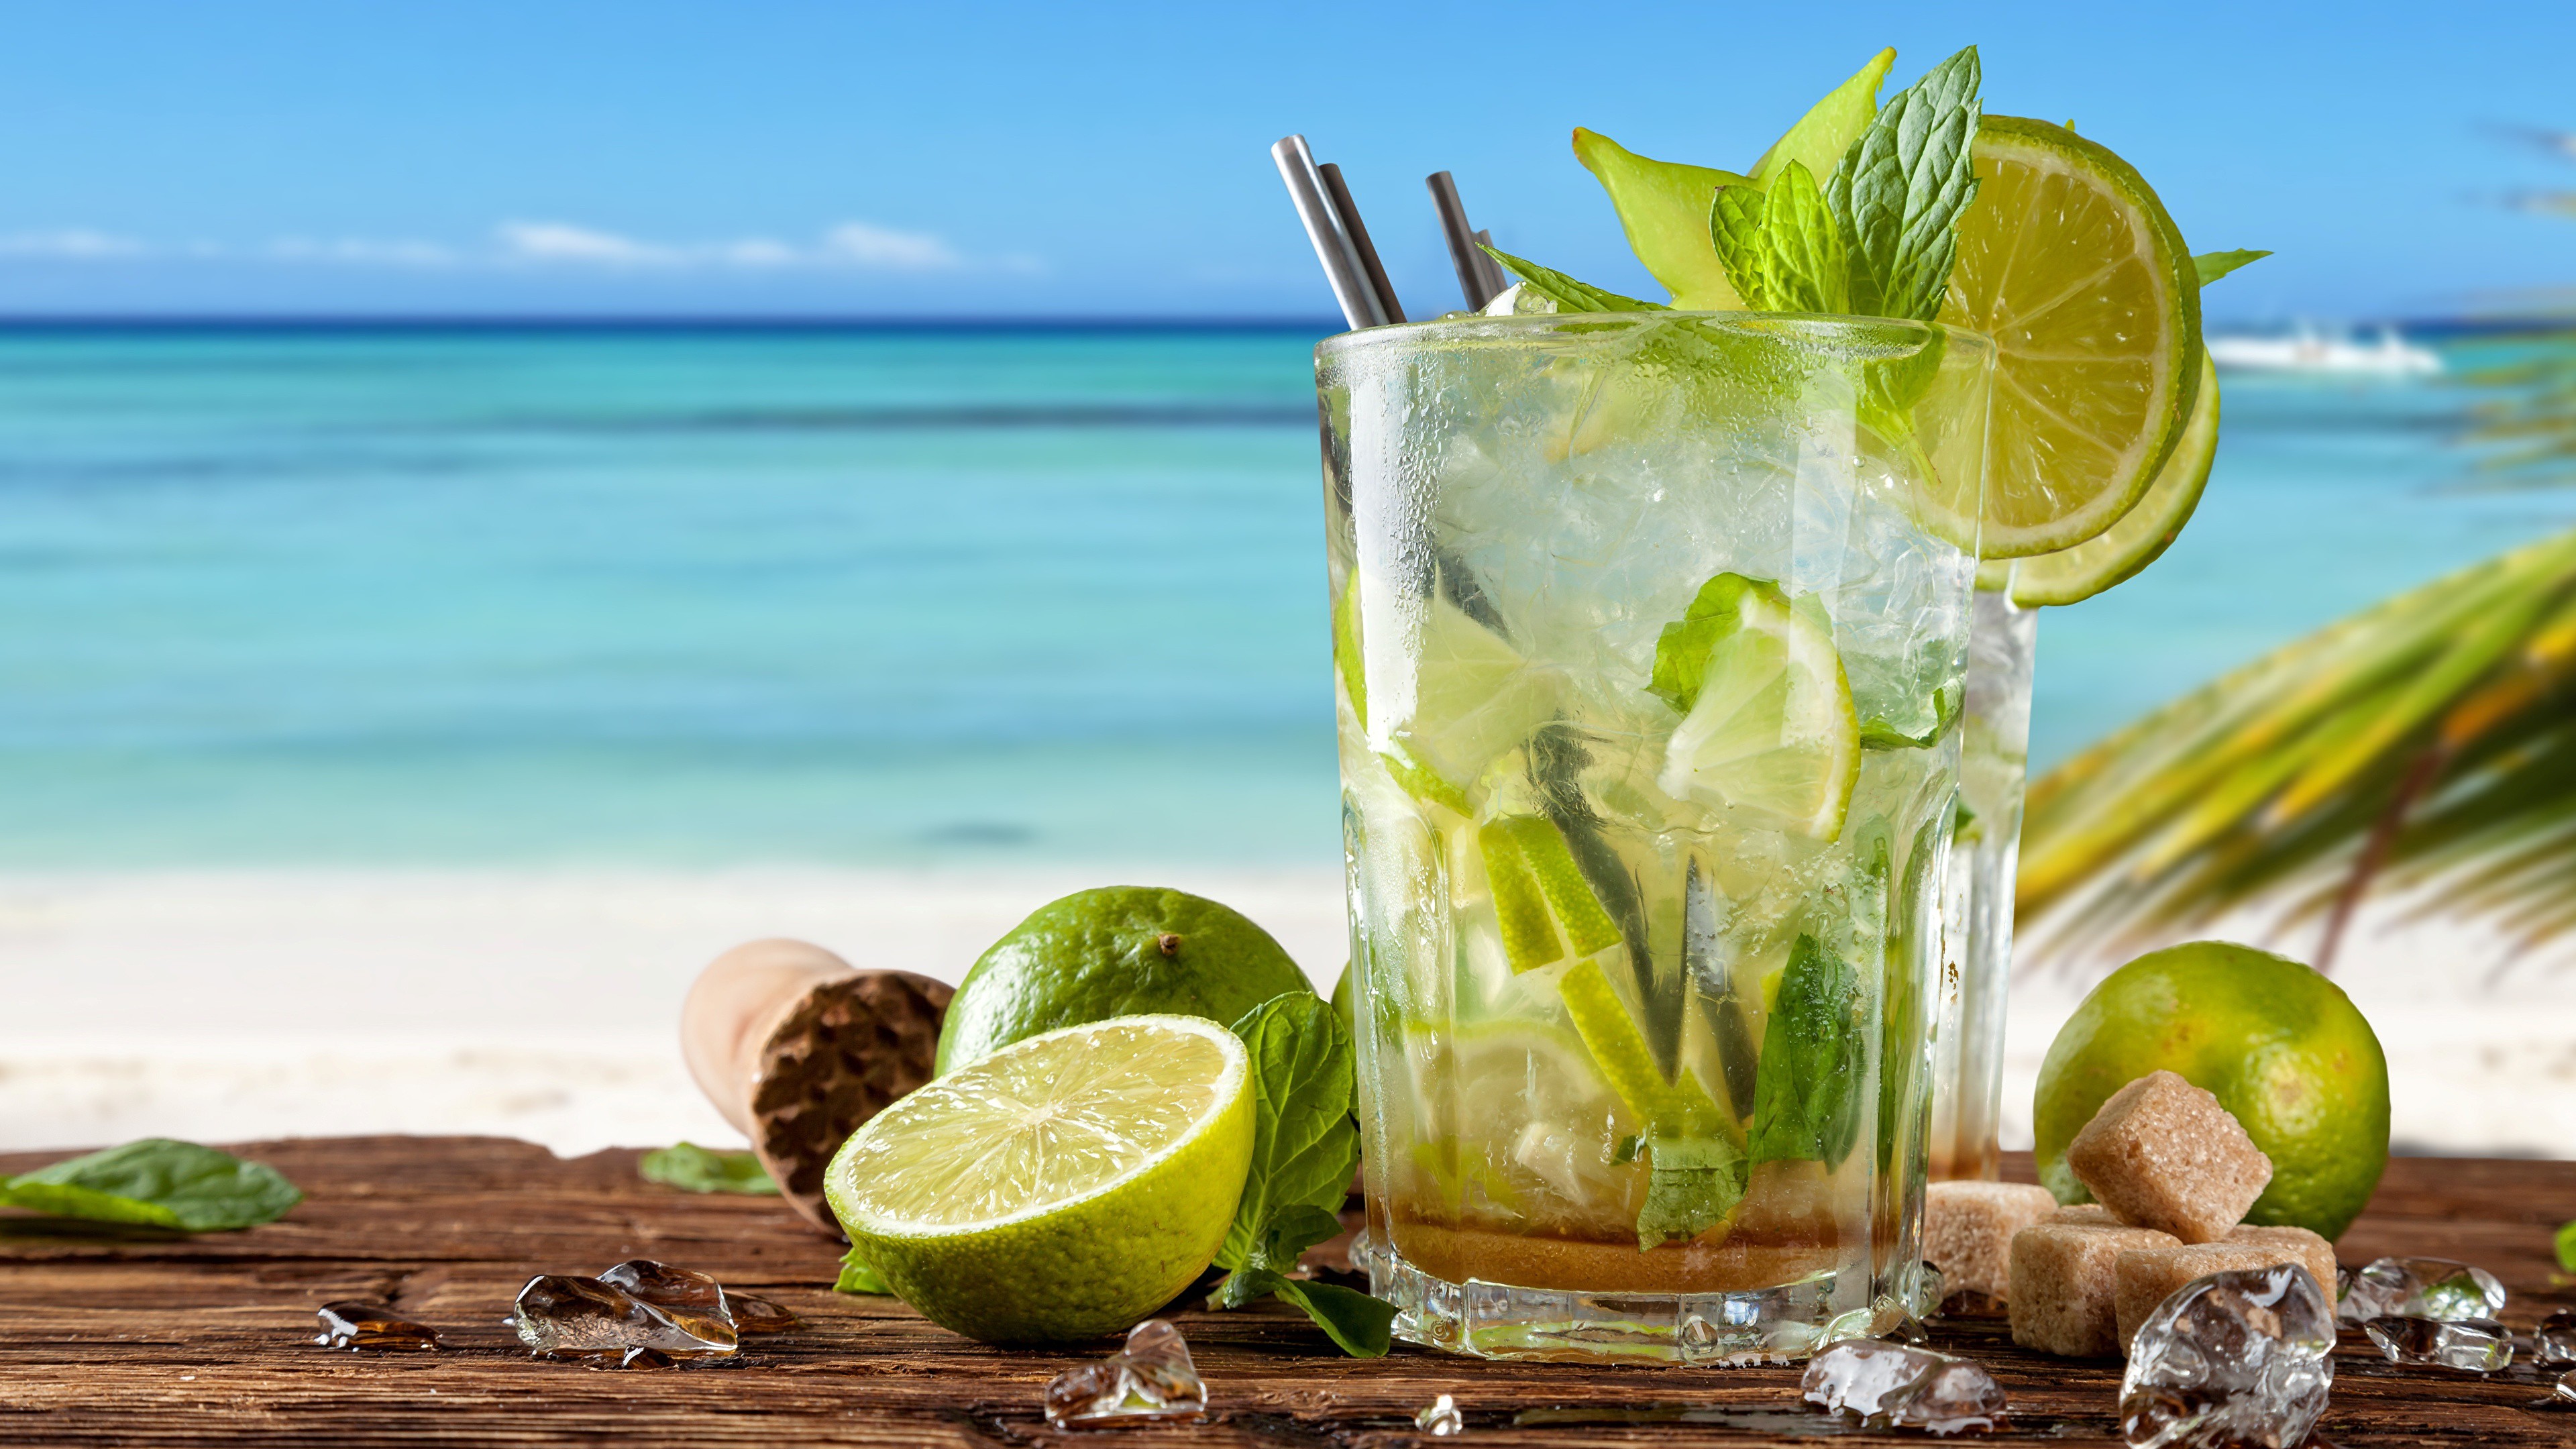 Click image for larger version  Name:	Lime_Mojito_Cocktail_Summer_Highball_glass_527311_3840x2160.jpg Views:	10 Size:	1.21 MB ID:	202990